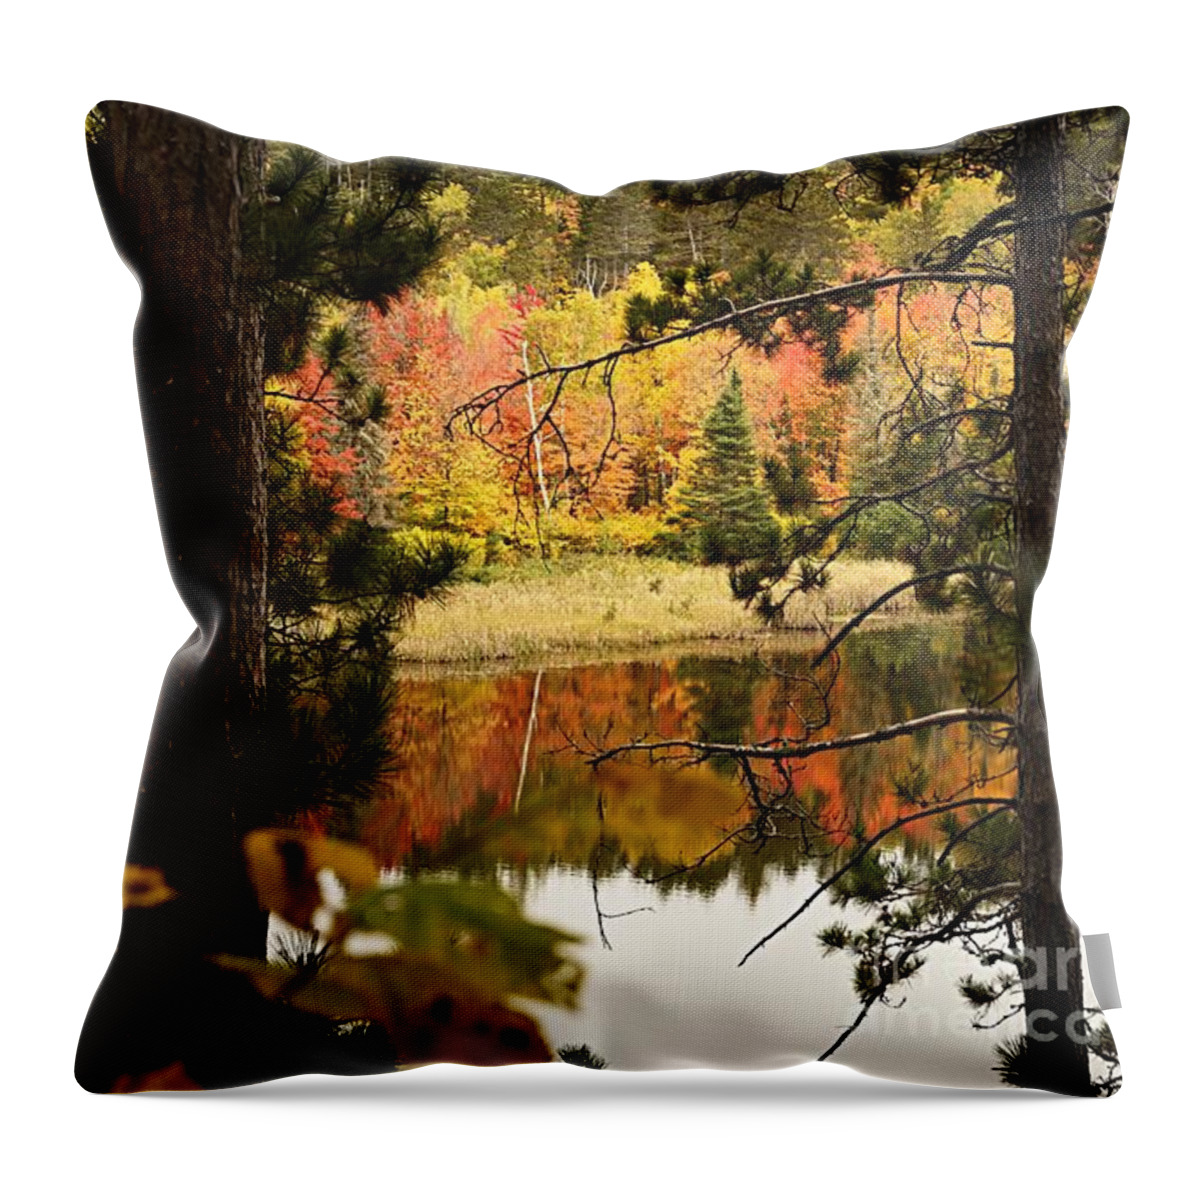 Landscape Throw Pillow featuring the photograph Glimpse of Autumn by Larry Ricker